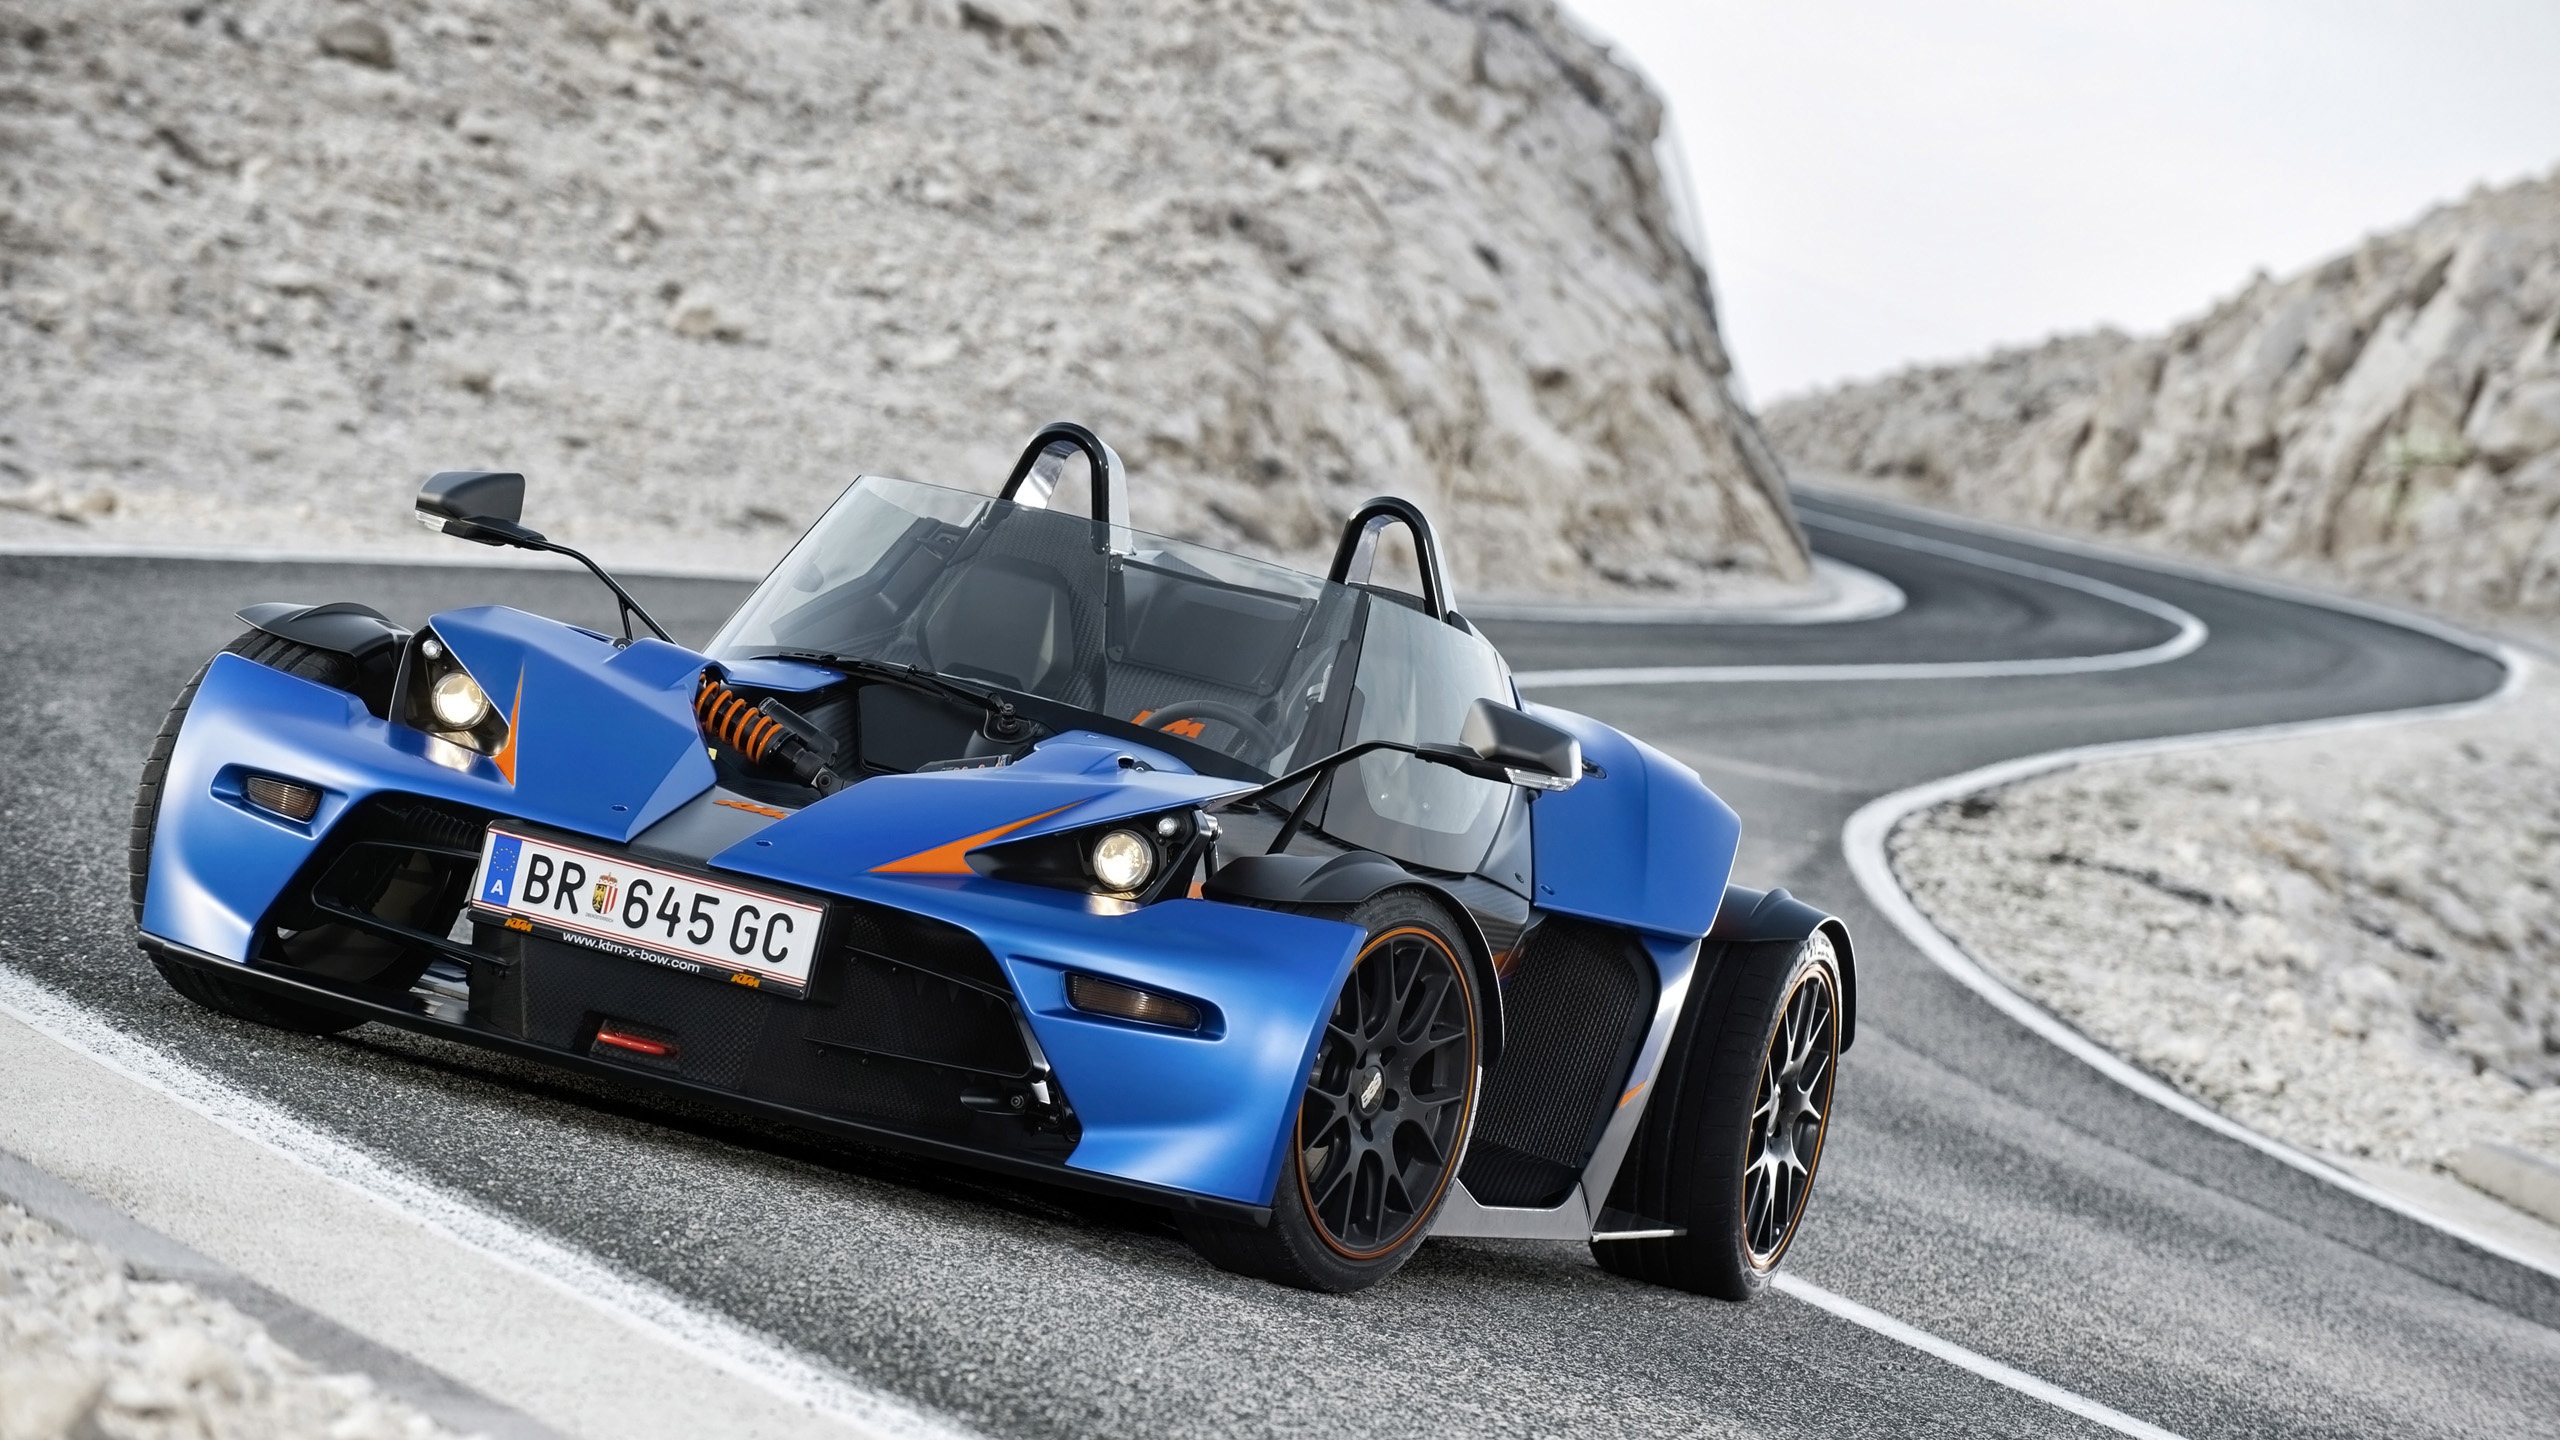 Free photo Ktm x-bow stands on a mountain road